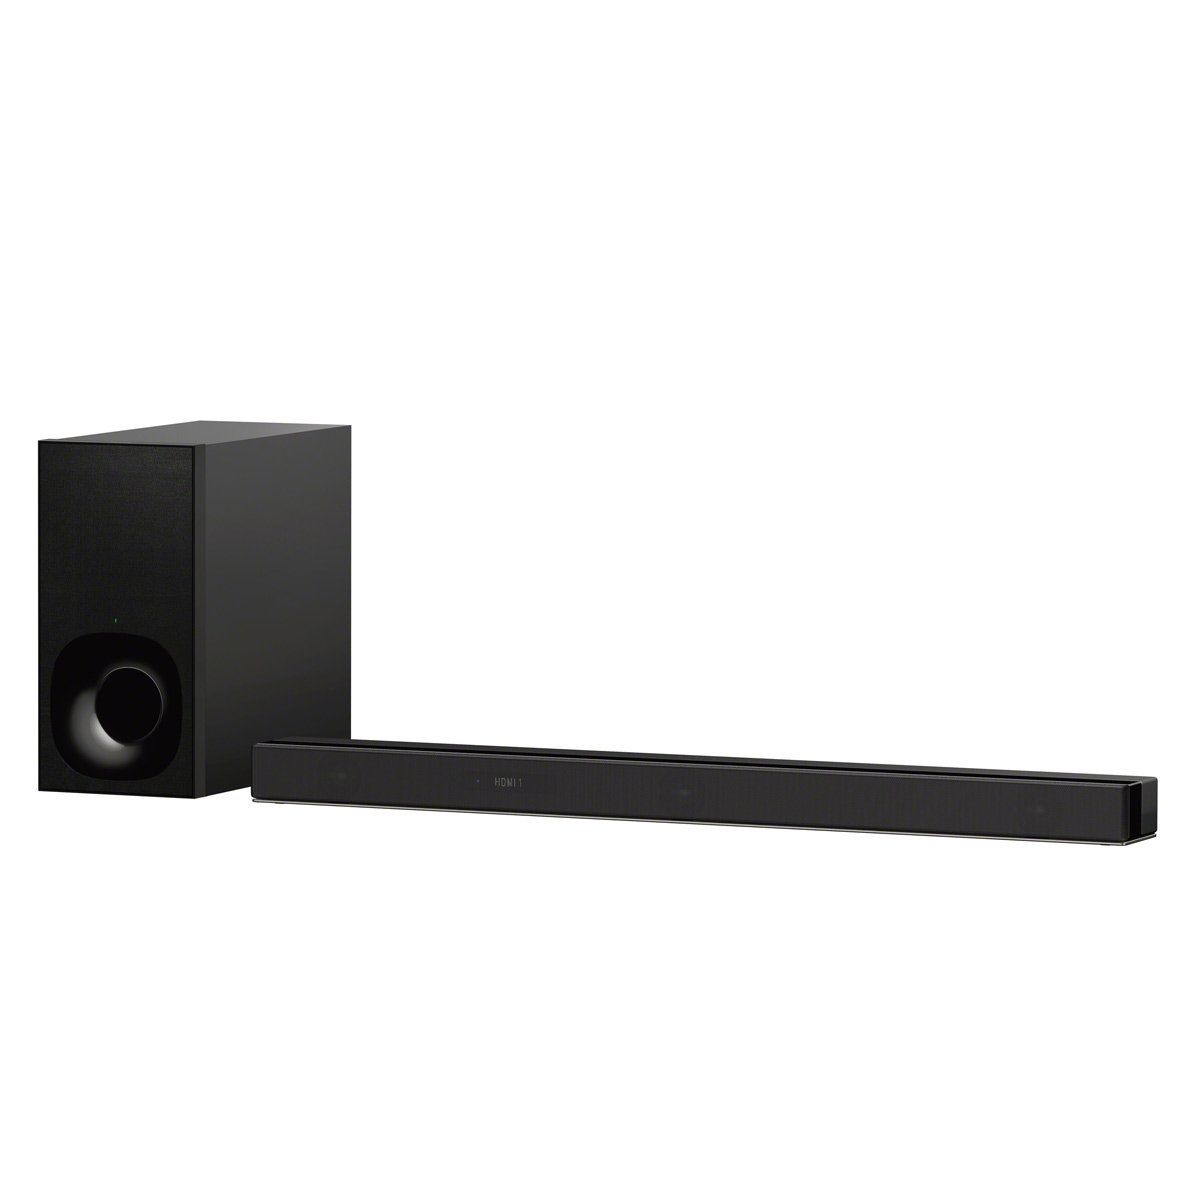 HT-Z9F 3.1ch Dolby Atmos/ DTS:X Soundbar w/ Subwoofer Angled Front View